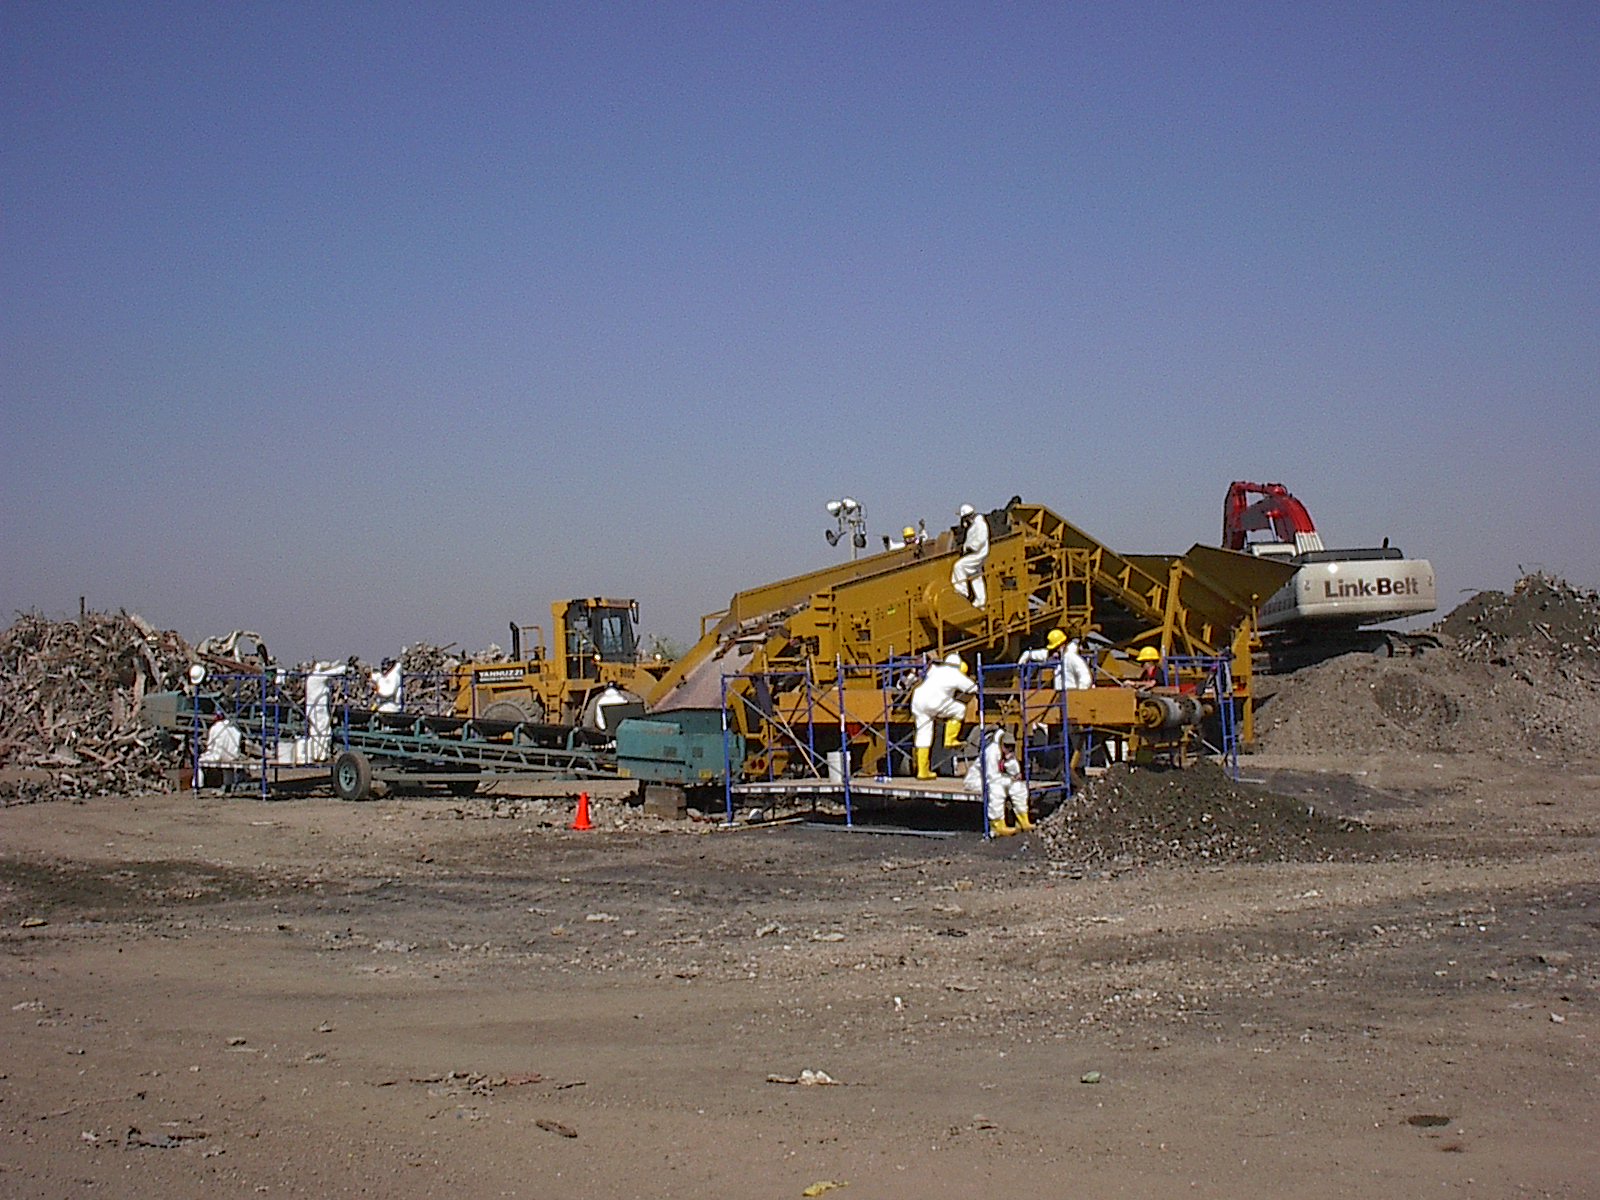 workers in white use machinery to sort debris